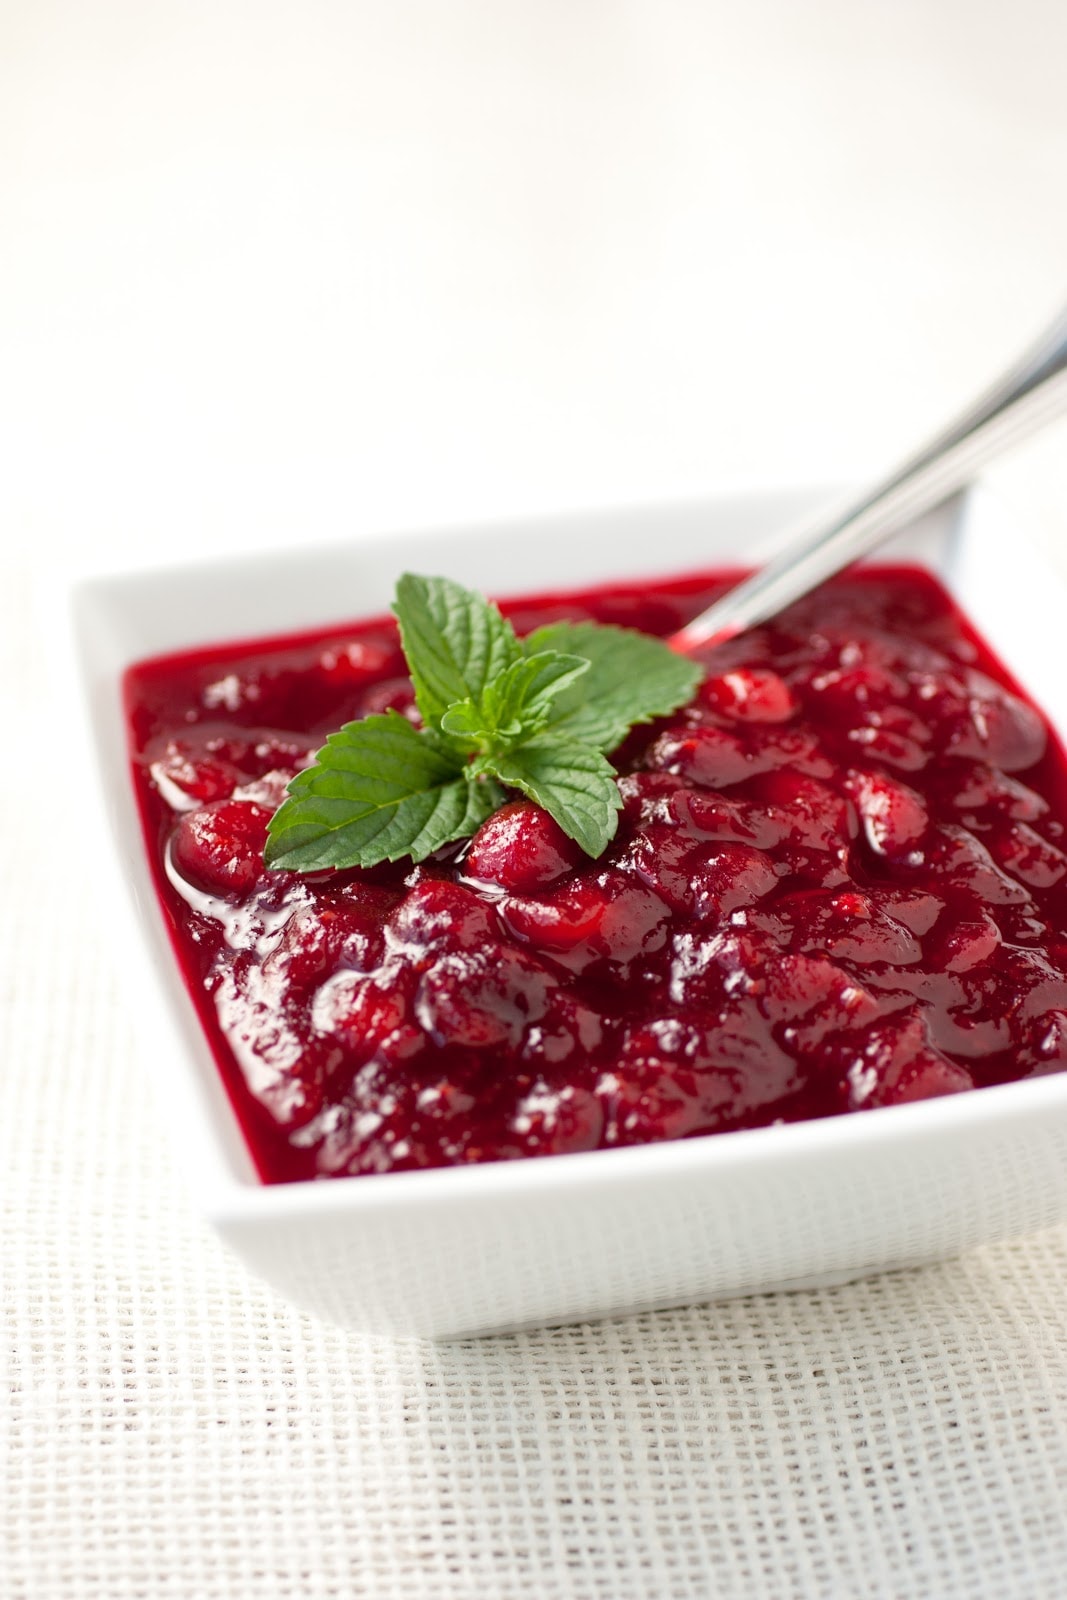 Homemade Cranberry Sauce - Cooking Classy